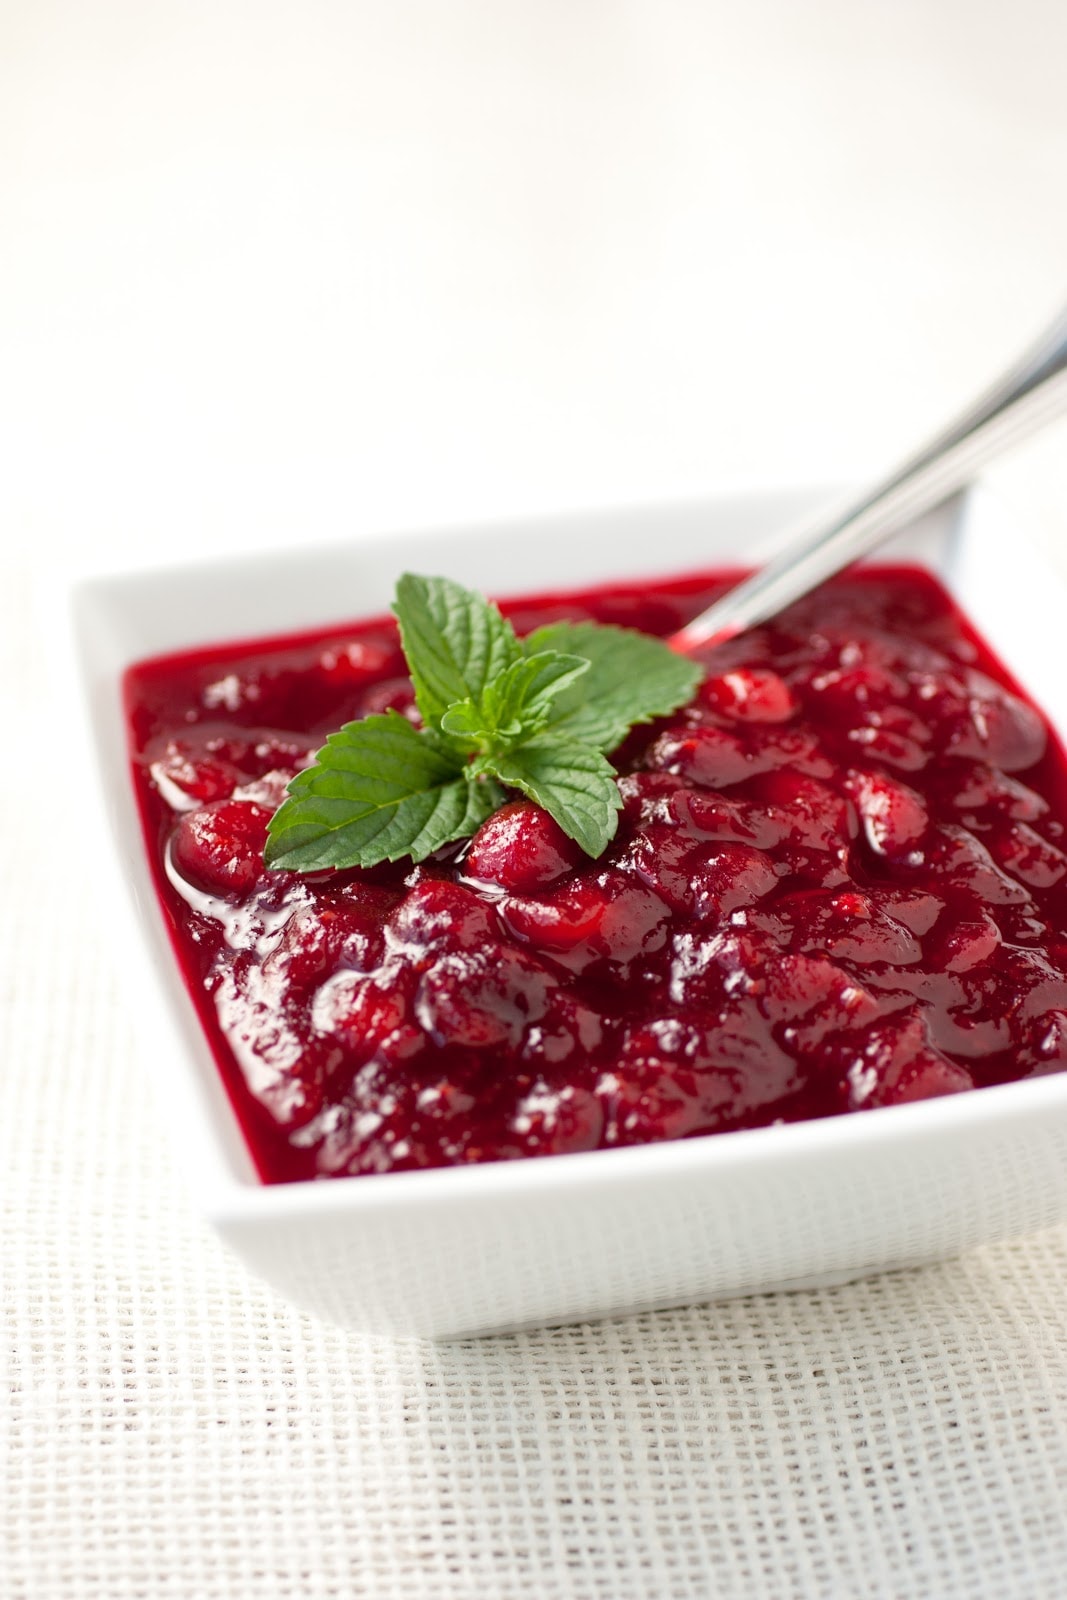 Homemade Cranberry Sauce - Cooking Classy